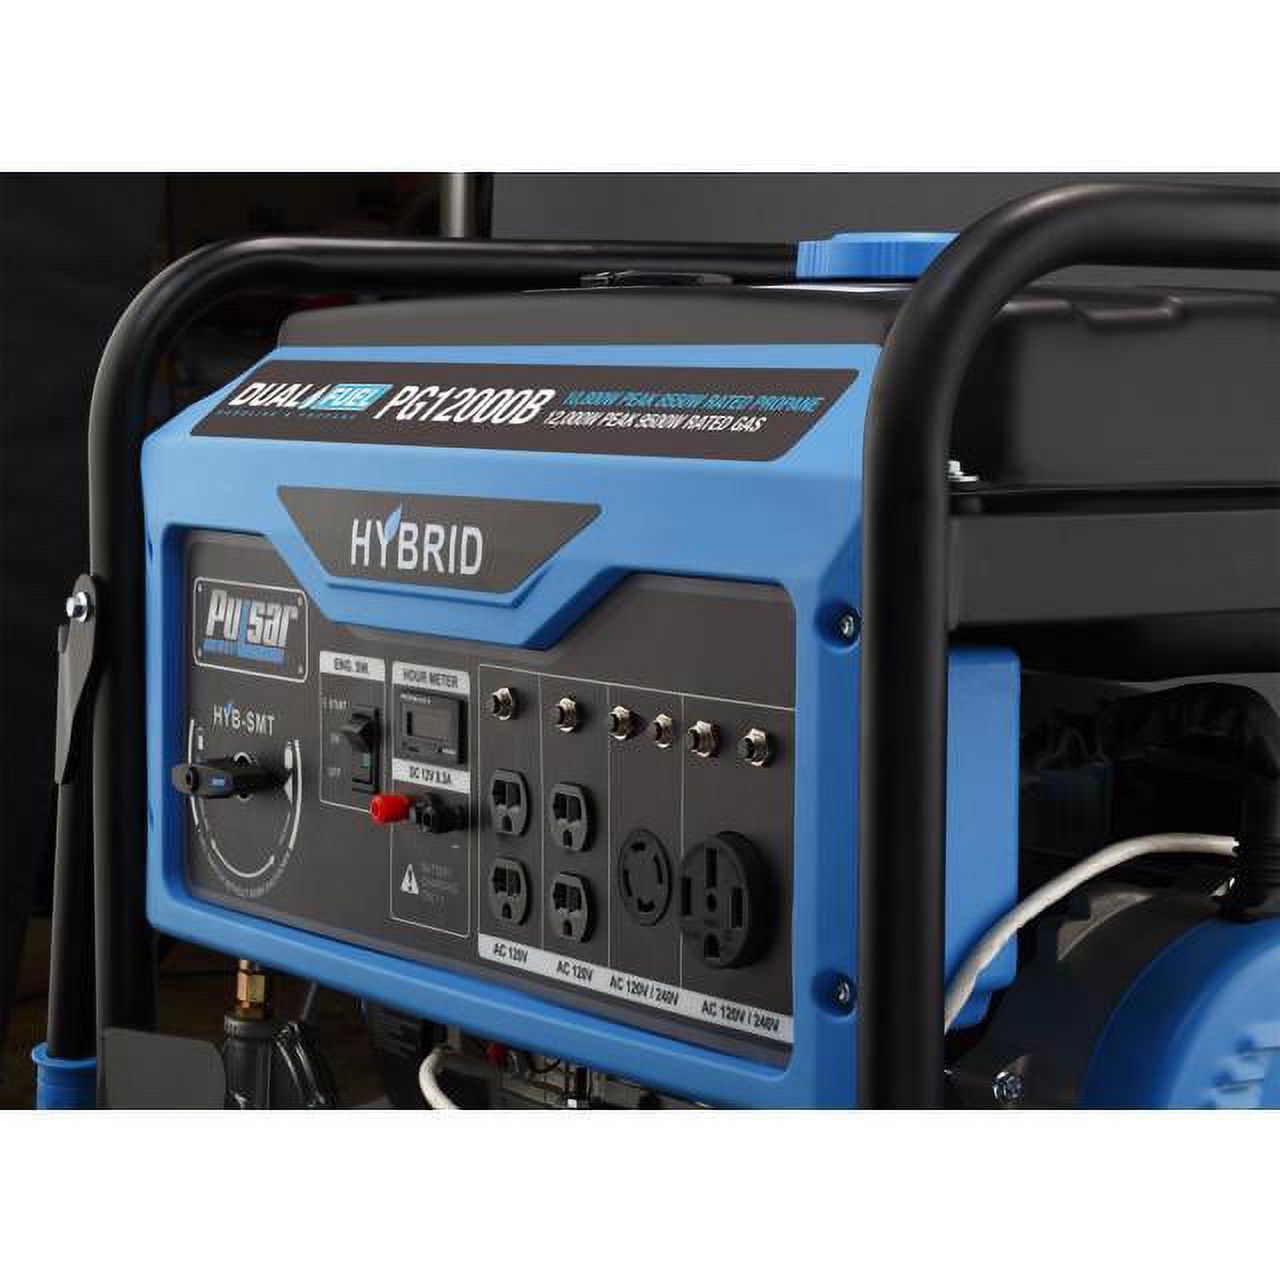 Pulsar 12,000W Dual Fuel Portable Generator with Electric Start – CARB Compliant - image 5 of 7